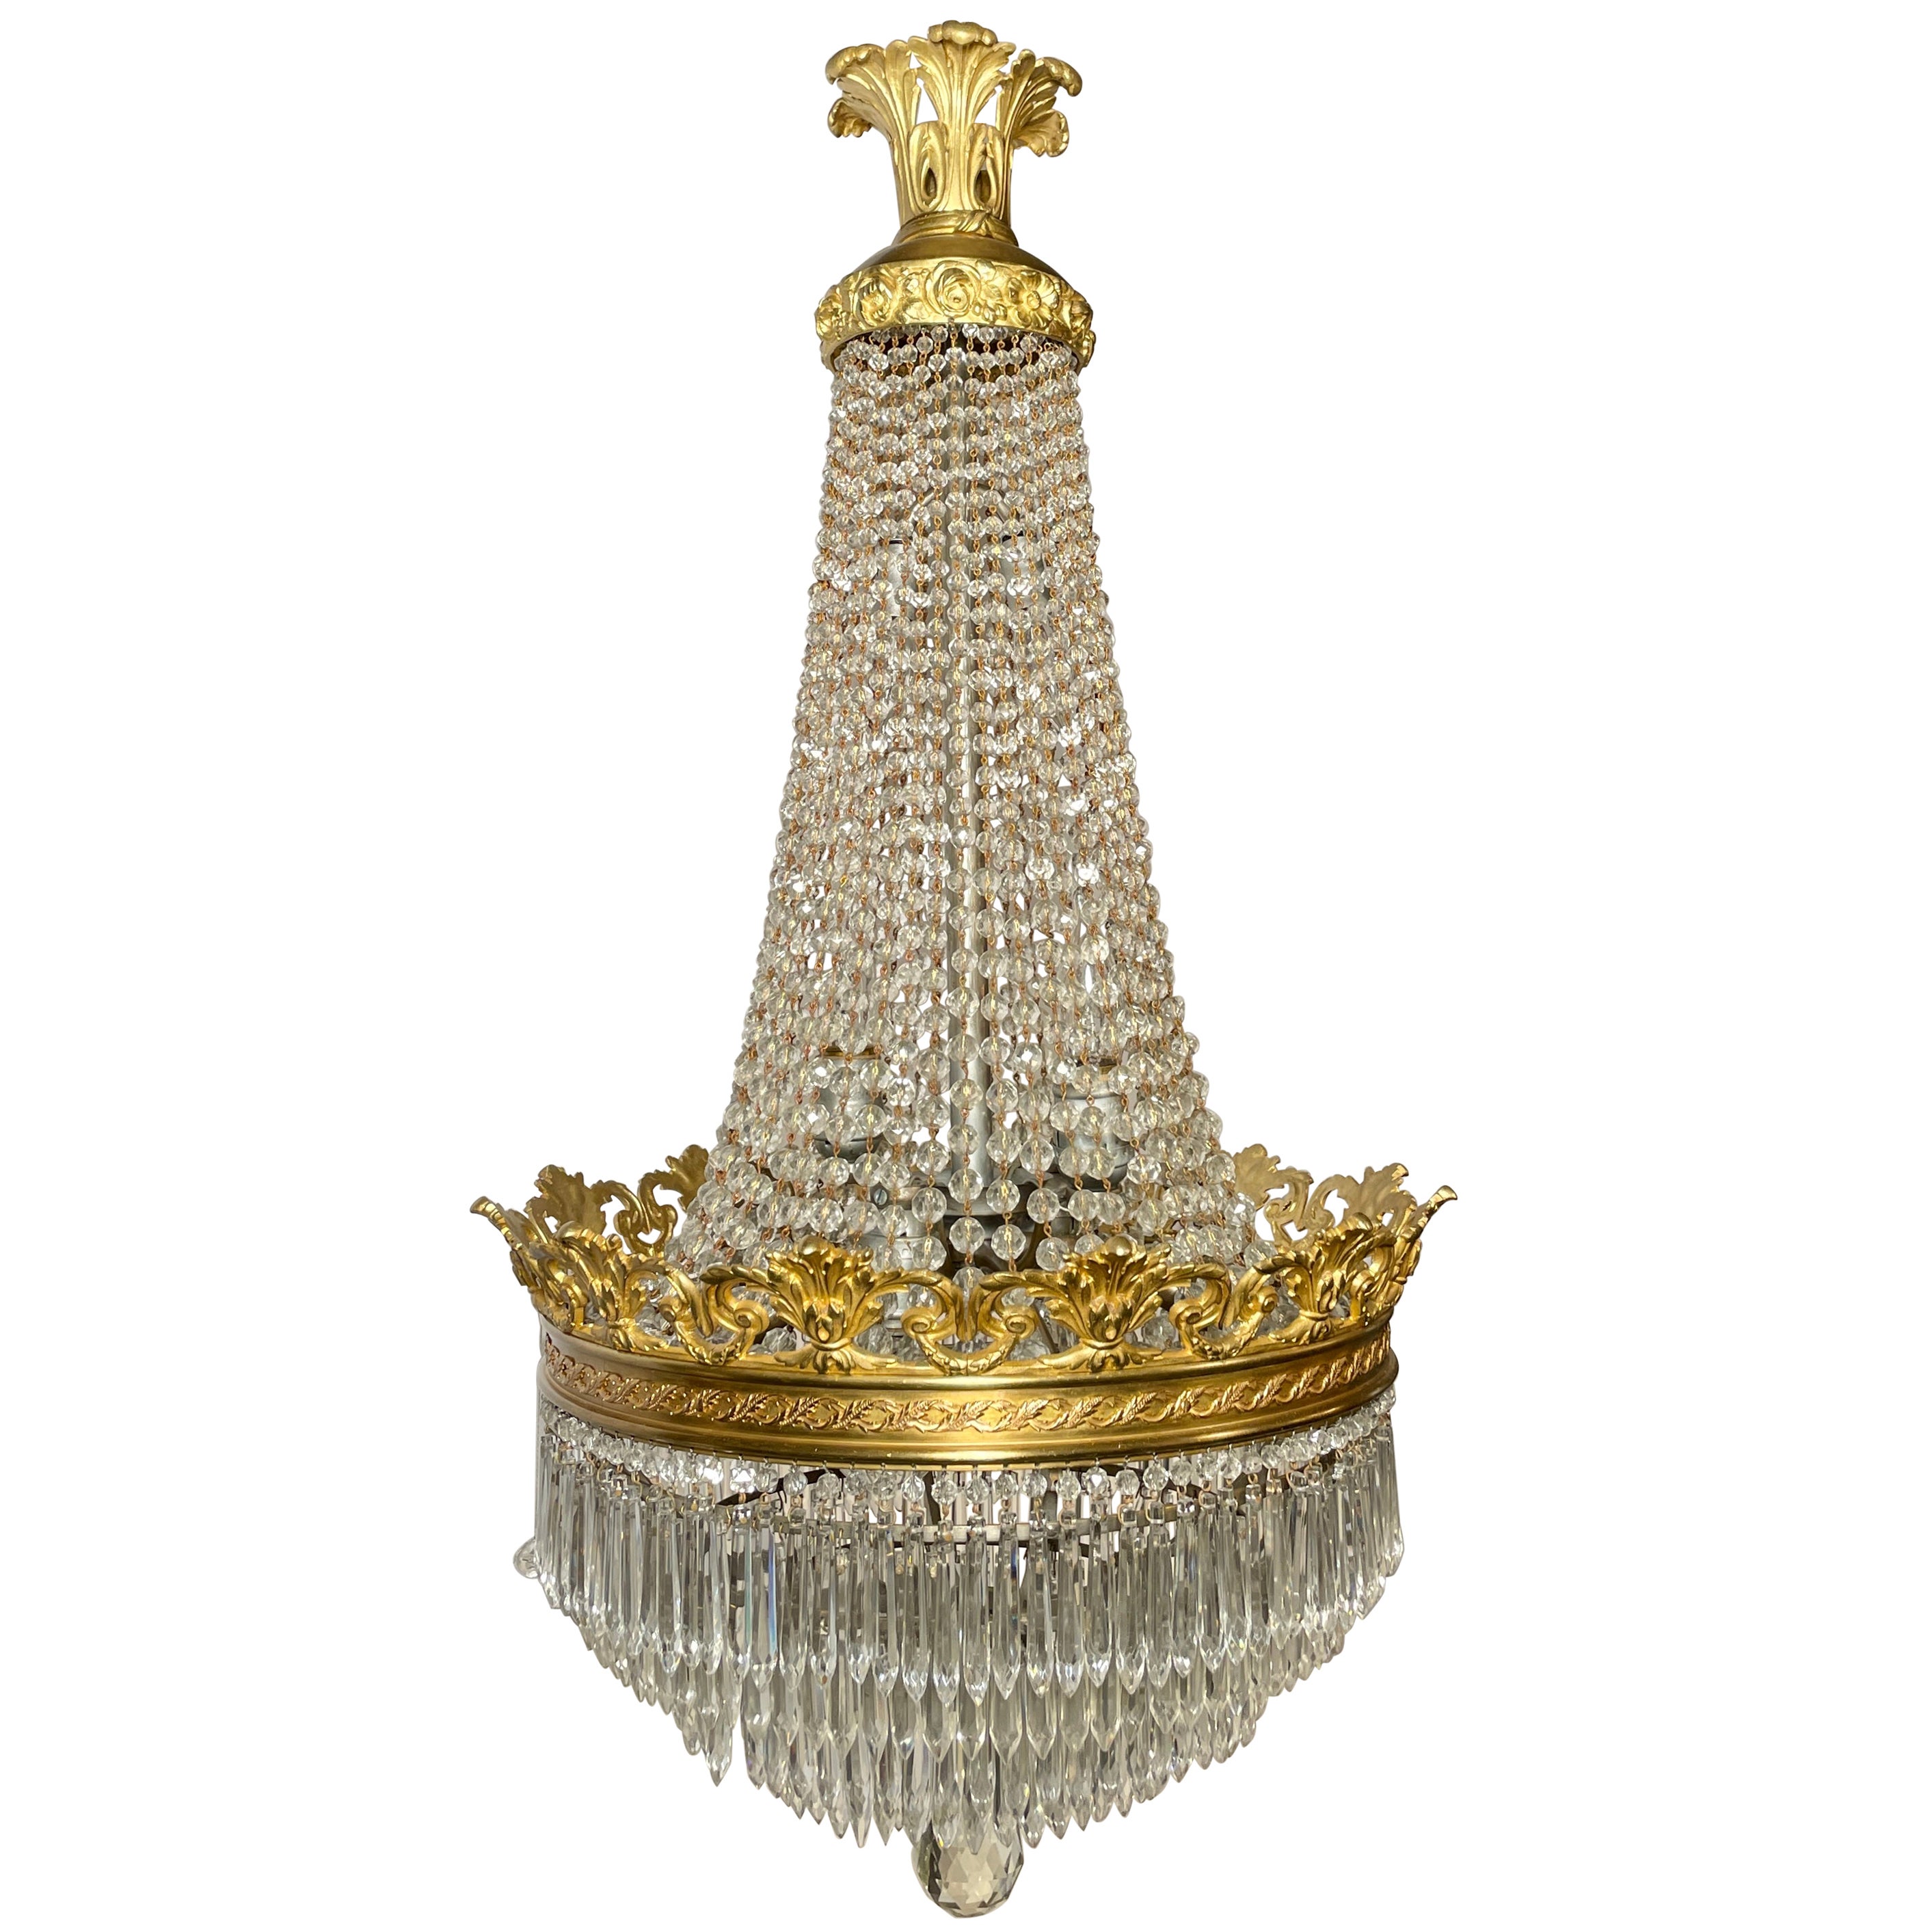 Antique French Baccarat Crystal and Gold Bronze Chandelier, Circa 1890s